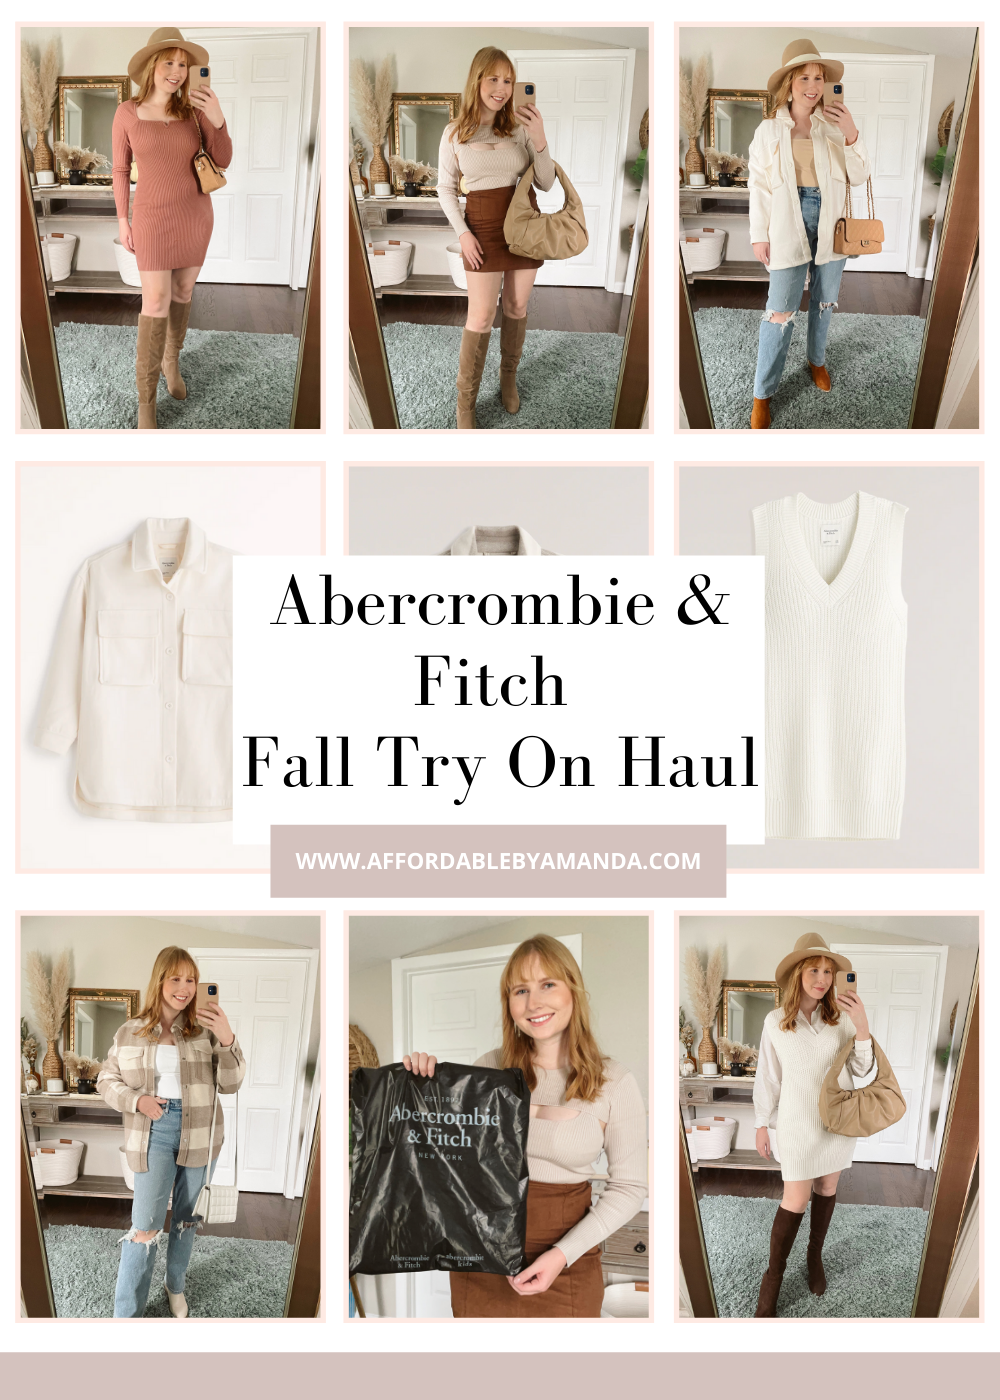 Abercrombie and Fitch Fall Try On Haul Affordable by Amanda